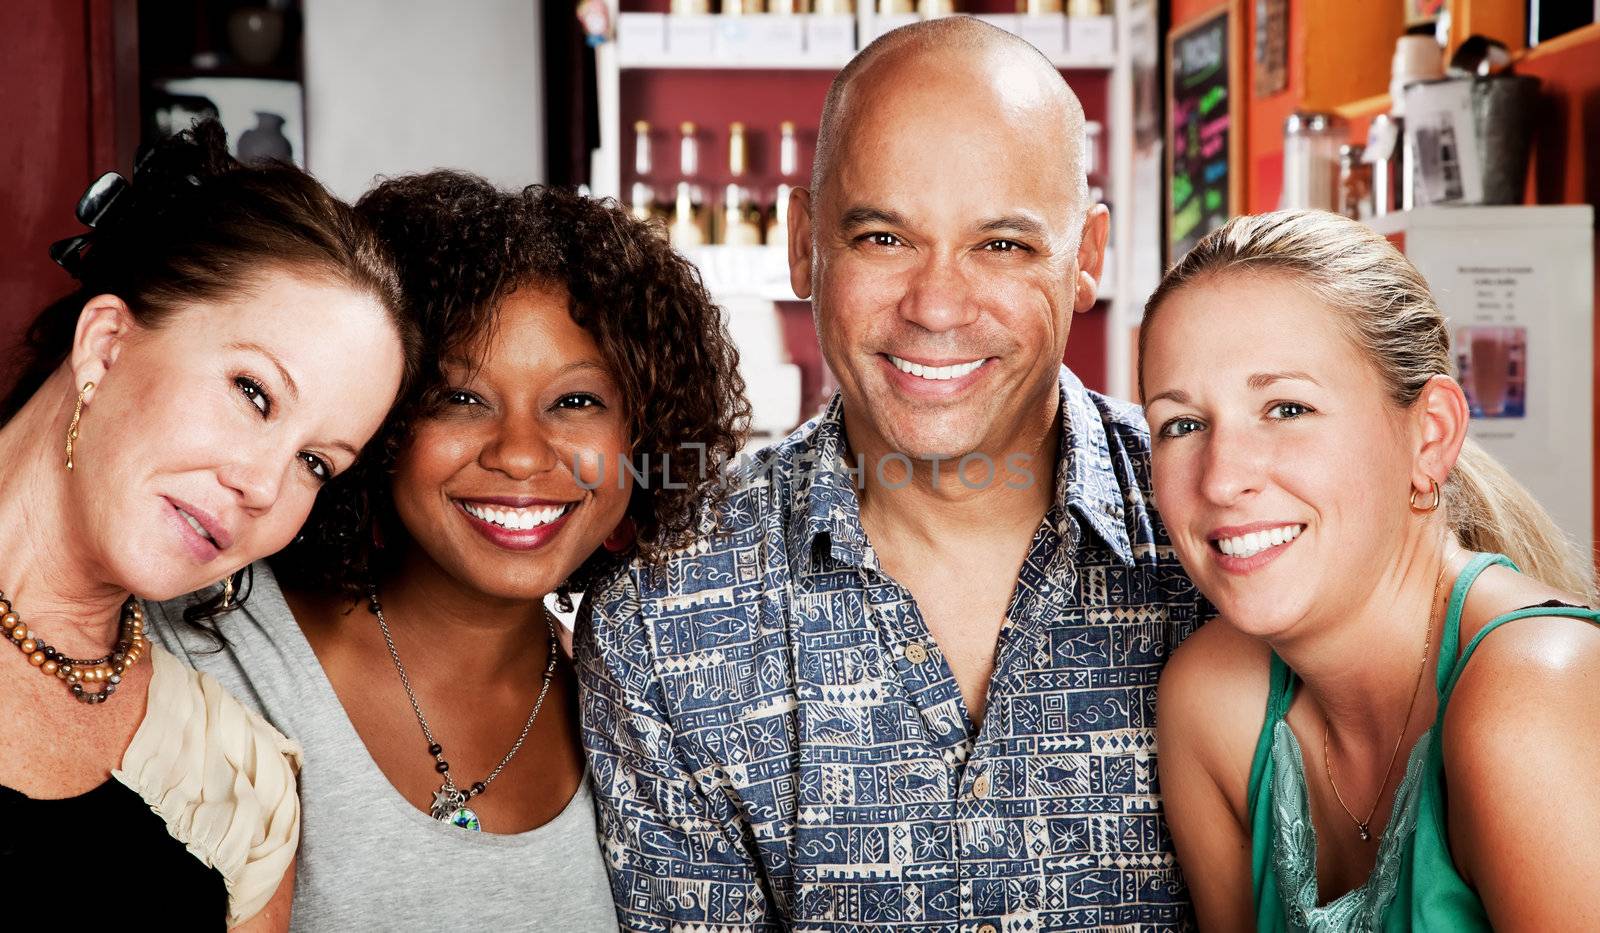 Man with shaved head and three pretty women in coffee house